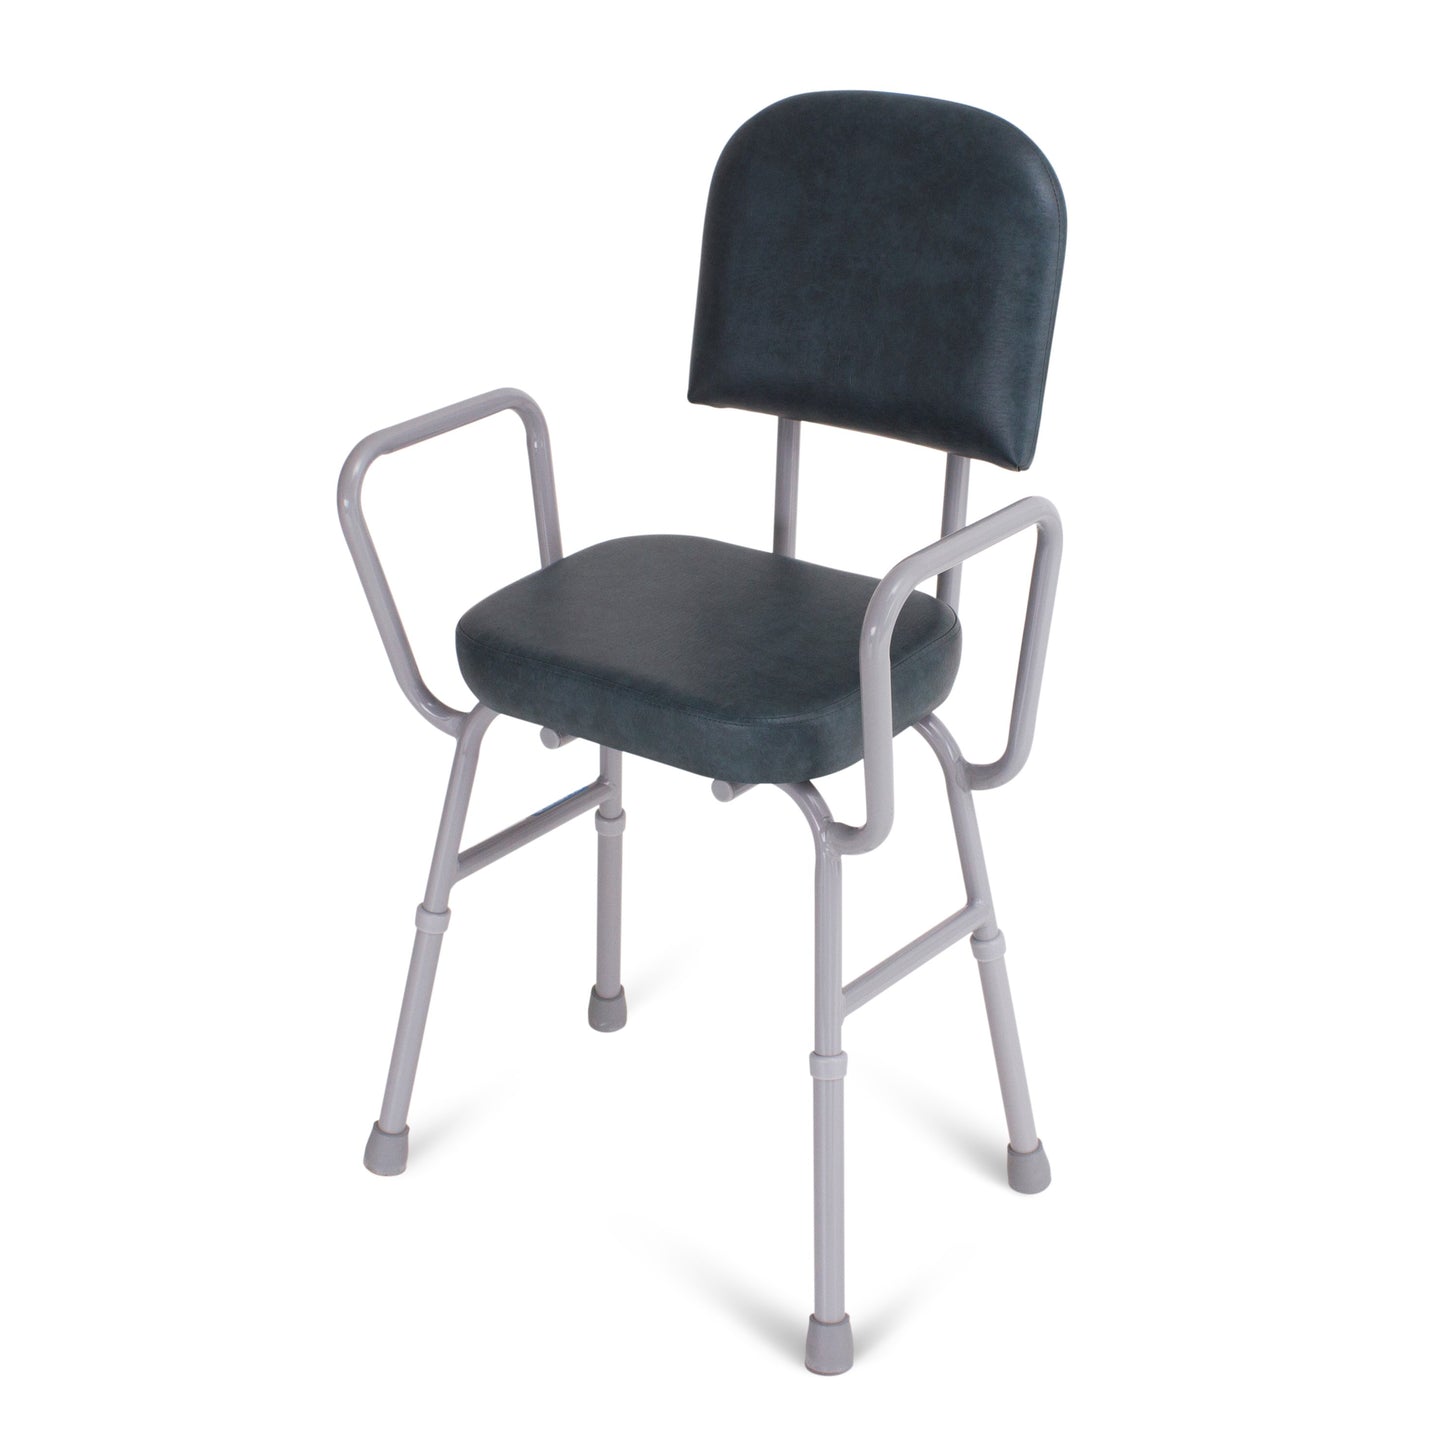 Support Stool With Arms